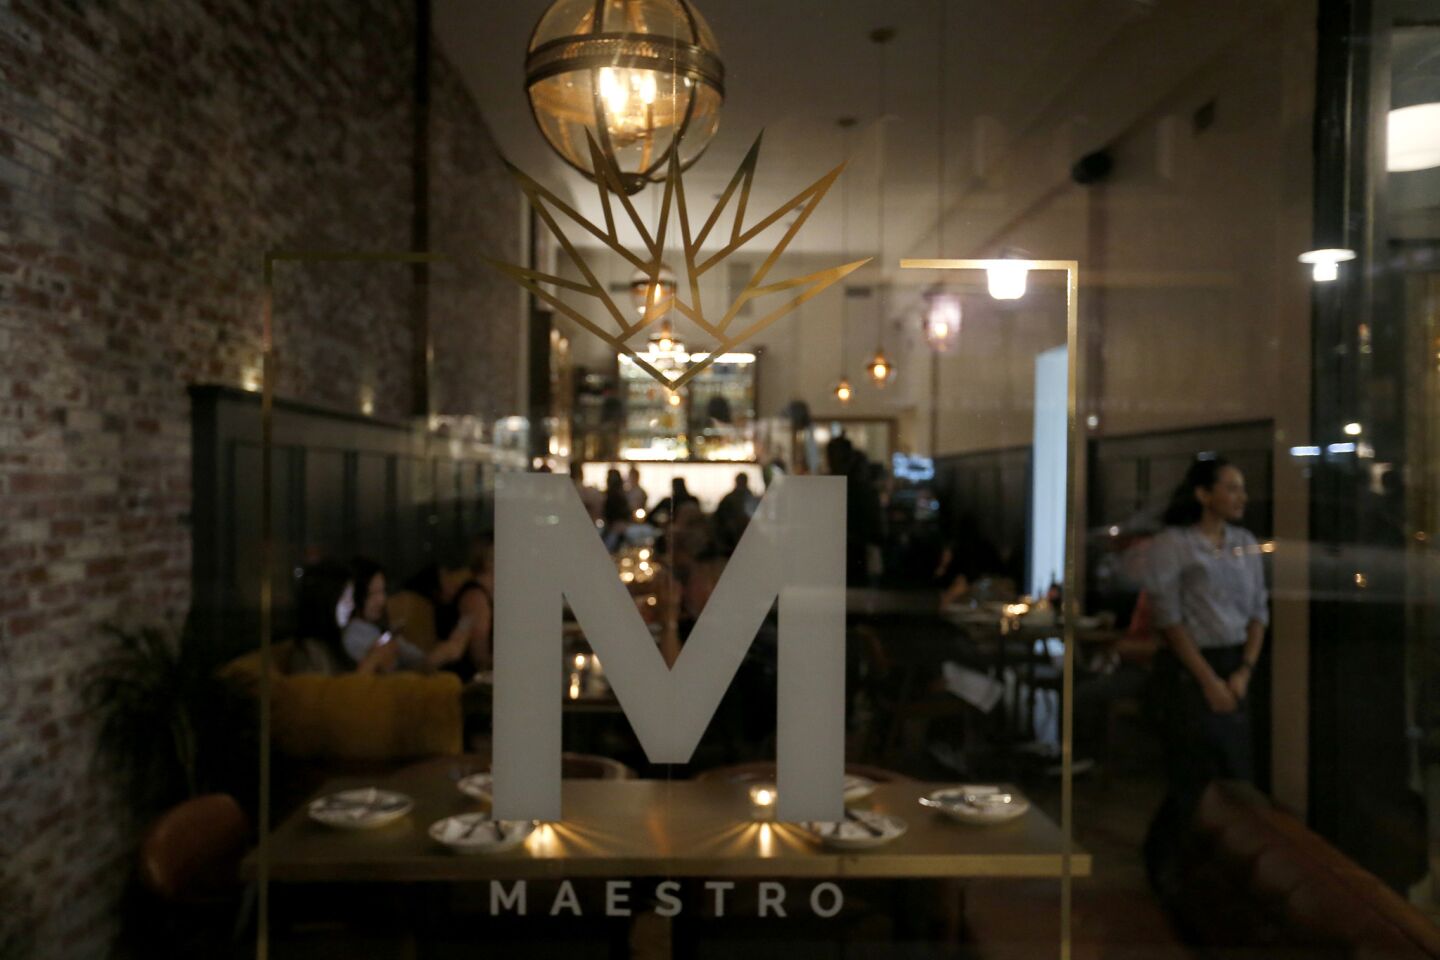 The view through the front window of Maestro.